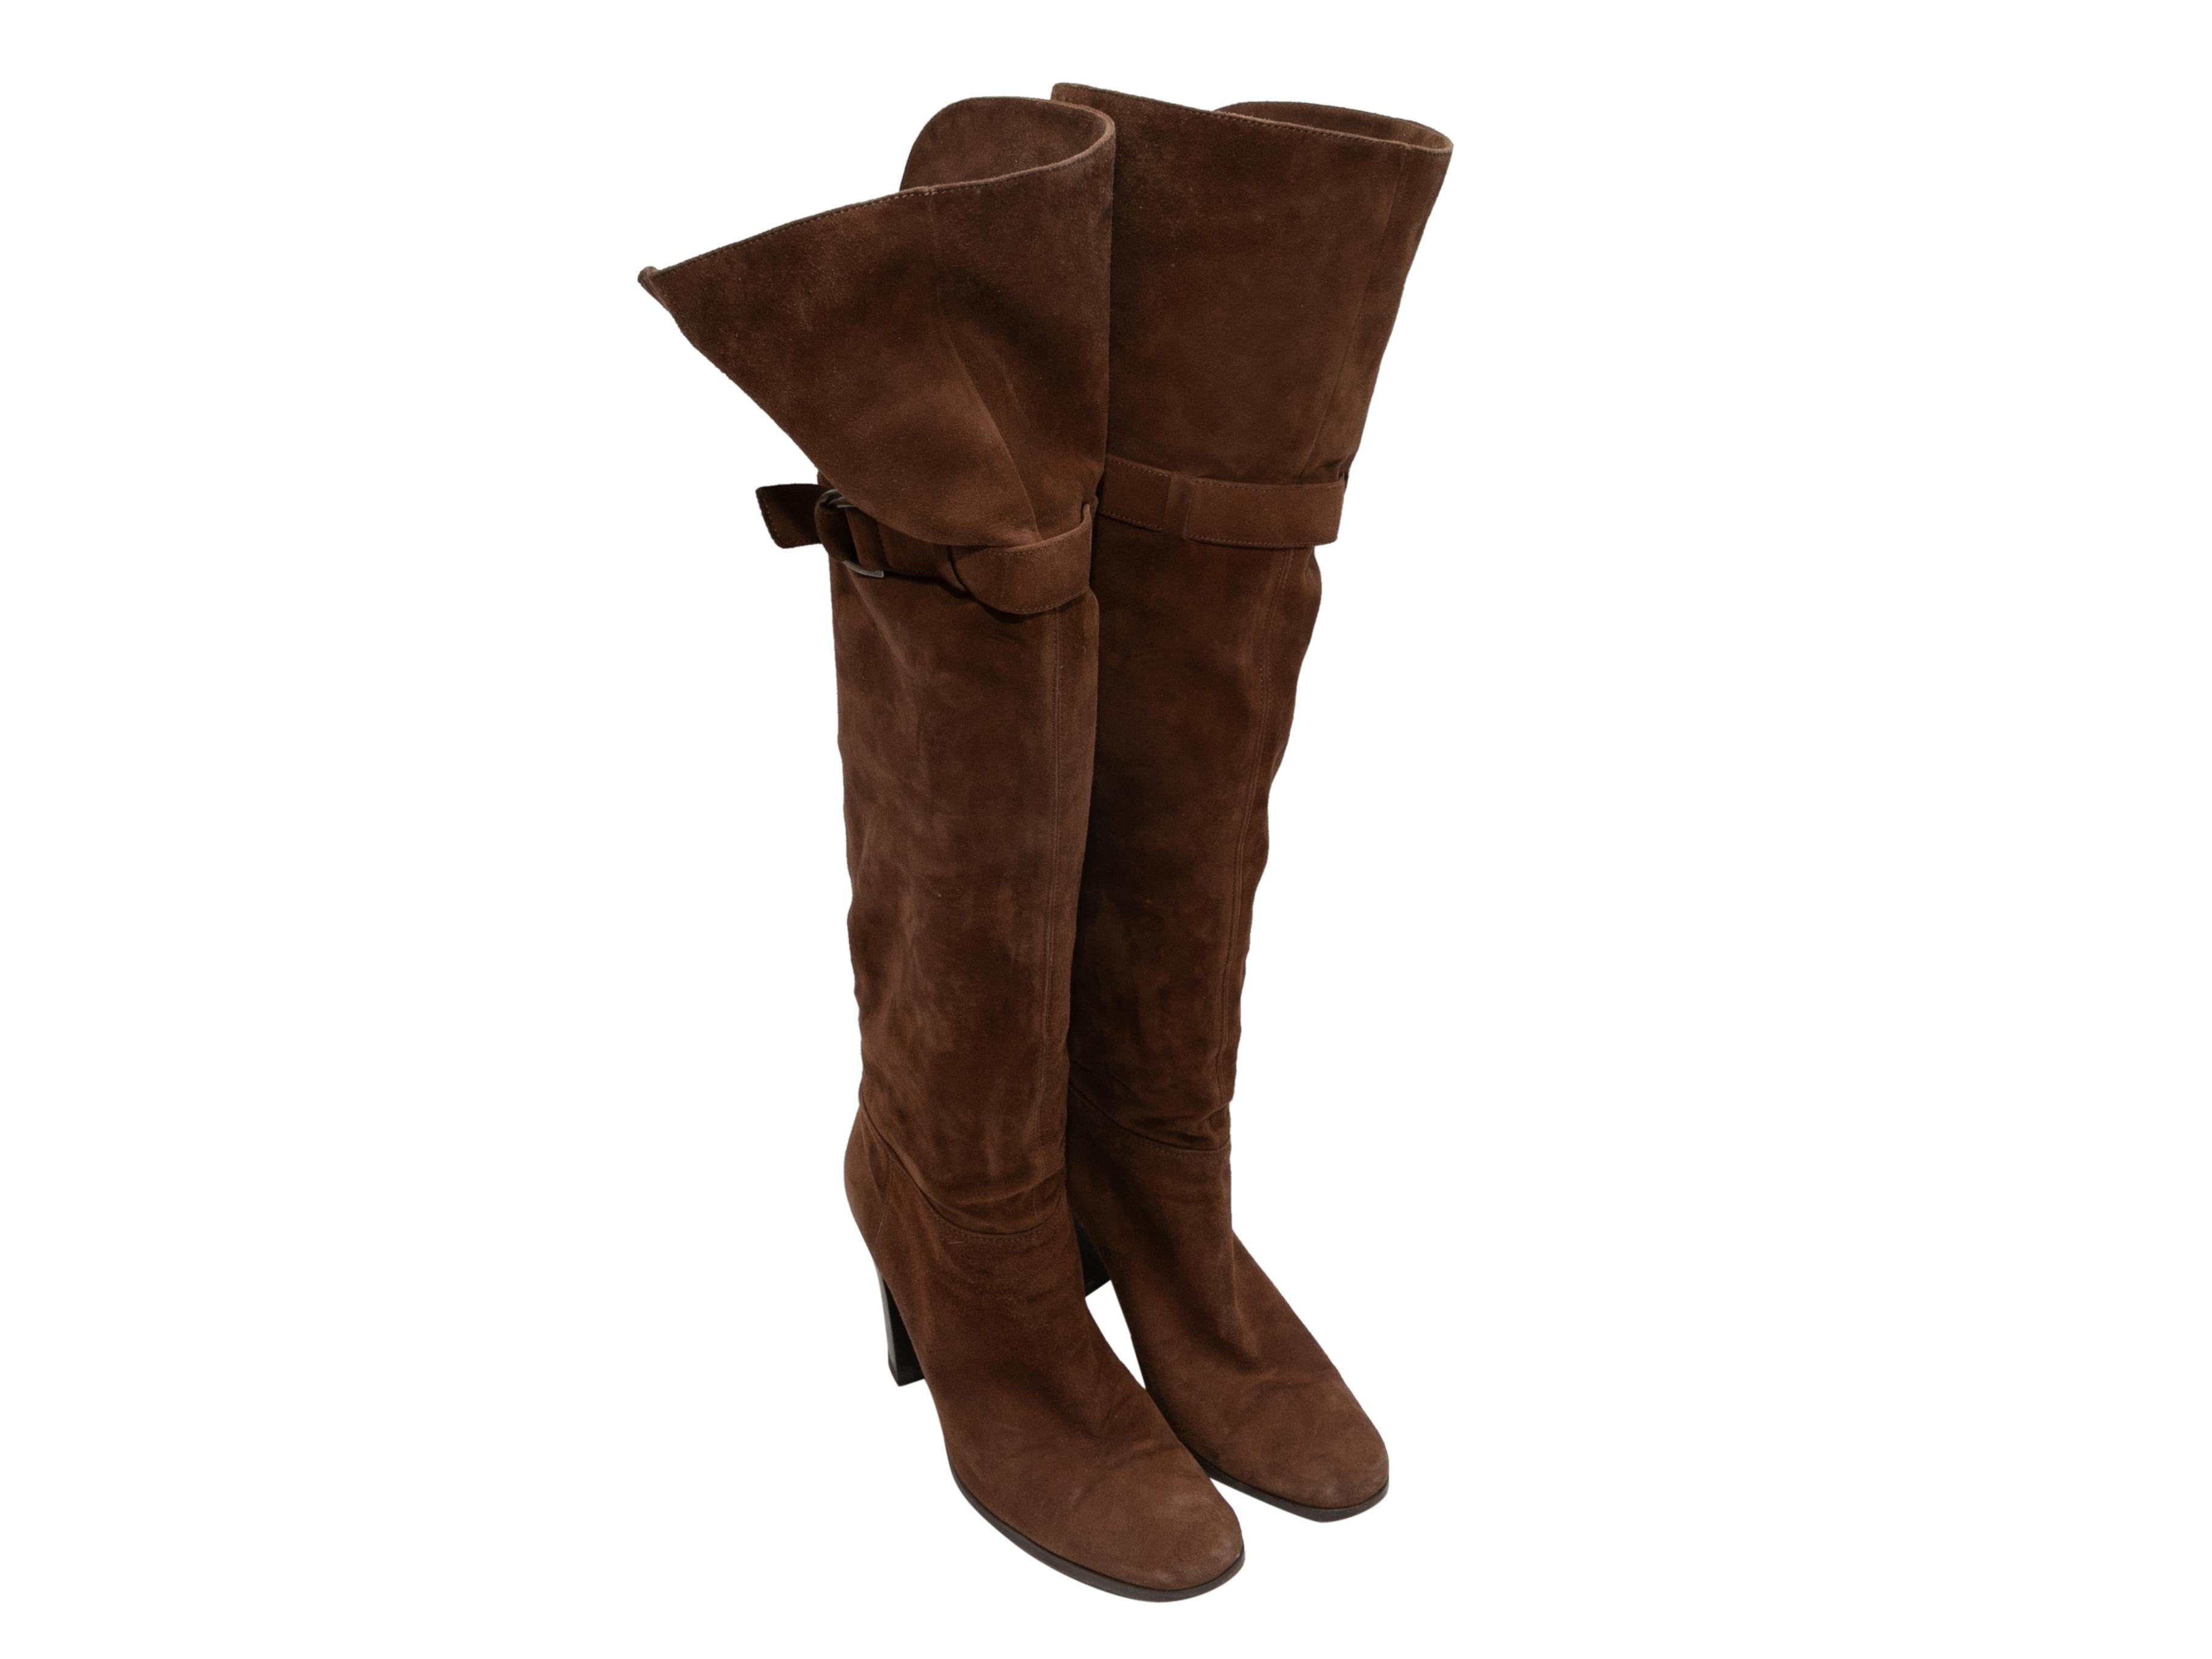 Brown knee-high suede boots by Sergio Rossi. Buckle accents at sides. Stacked heels. 18